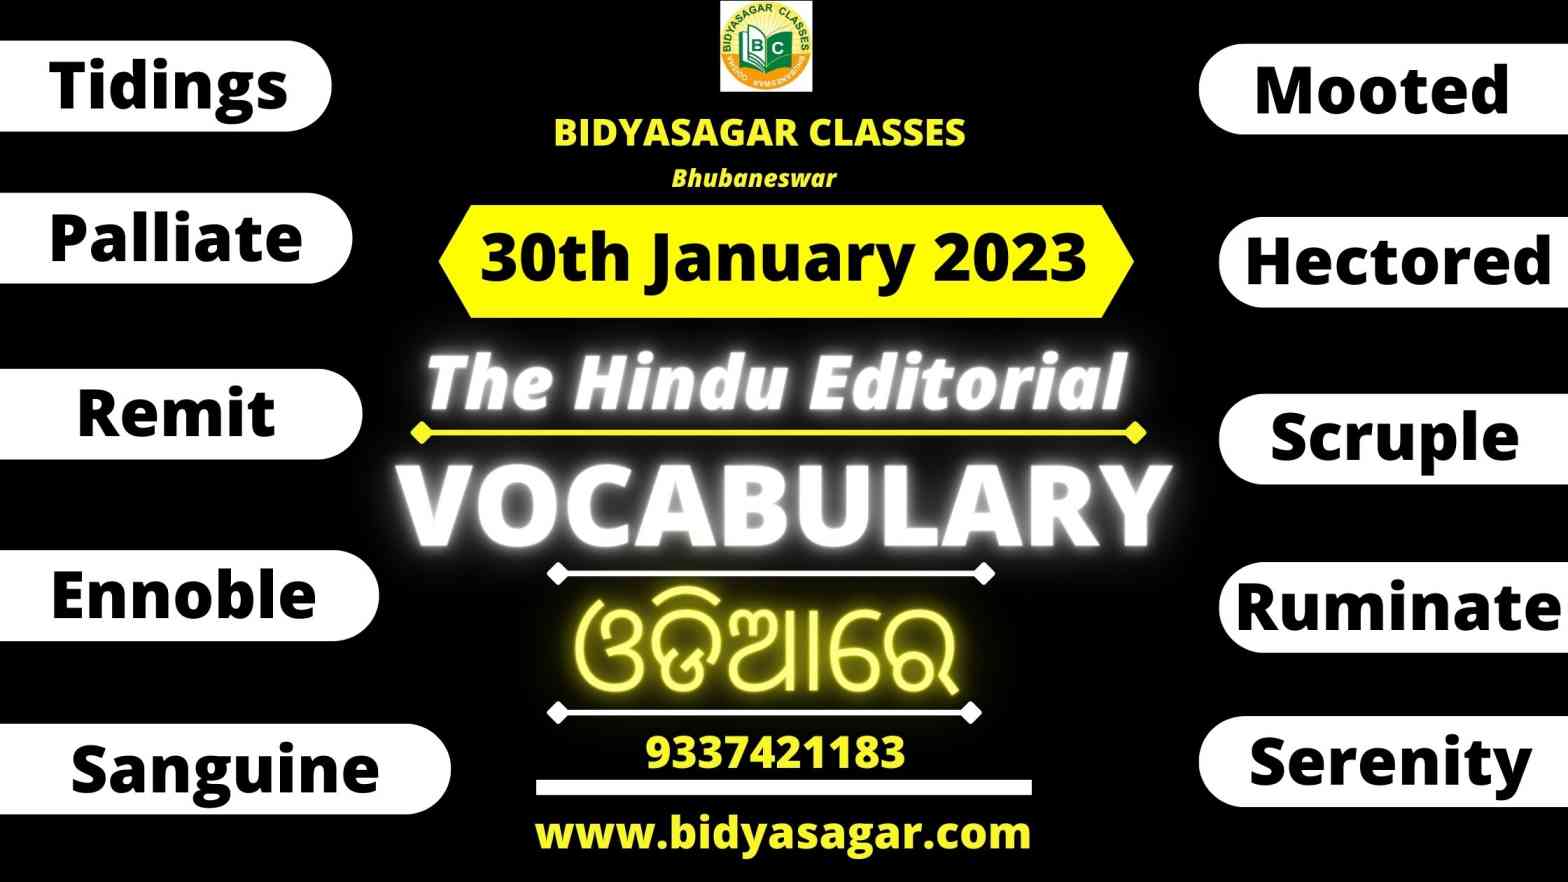 The Hindu Editorial Vocabulary of 30th January 2023